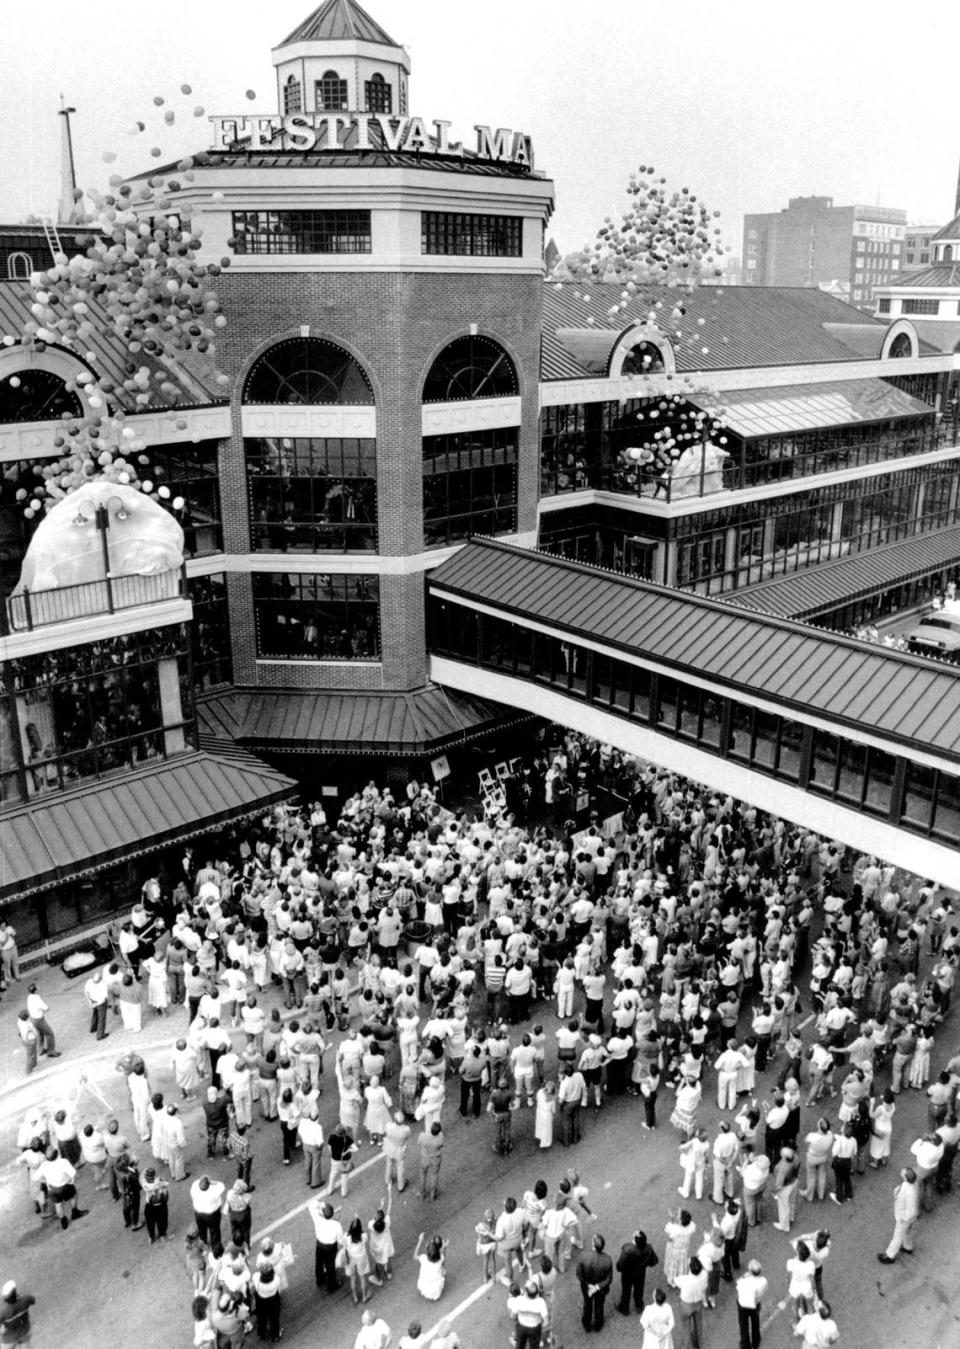 A large crowd was on hand as hundreds of balloons were released to signal the grand opening the Festival Market on July 25, 1986. The grand opening for $16 million development at West Main Street and North Broadway kicked off 10 days of festivities that allowed the public to become acquainted with the shops and restaurants located inside the 3-story marketplace. About 42 of the market’s 72 shops and restaurants were open. The development failed to generate sustained profit and the complex was sold for $600,000 in 1994 in an auction. Festival Market was rebranded in 1999 as Triangle Center, consisting primarily of offices with a few retail and restaurant entries.